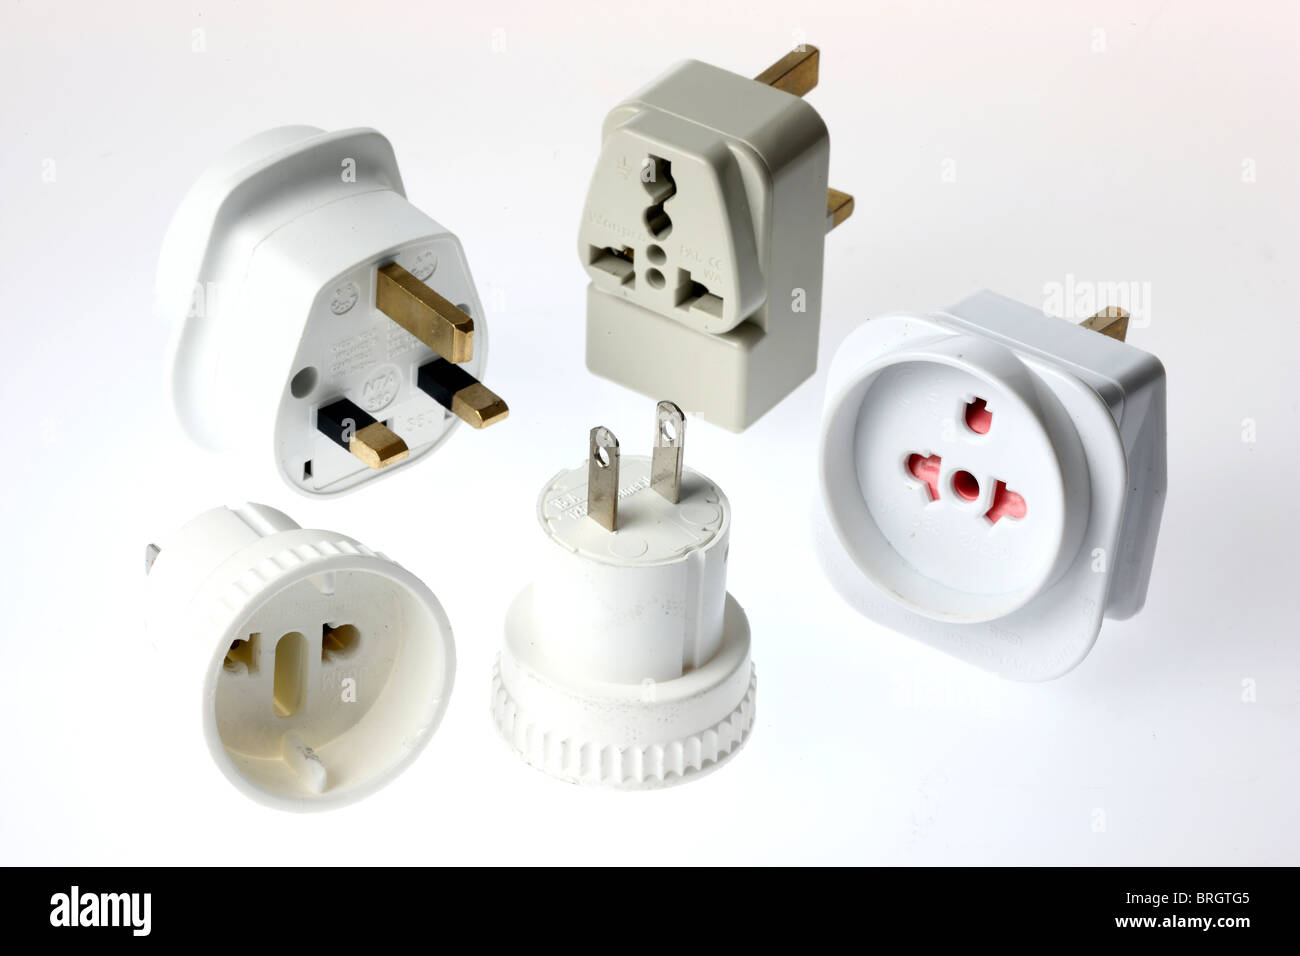 Power adapter plug and socket, for connecting different electrical systems. Travel equipment. Stock Photo